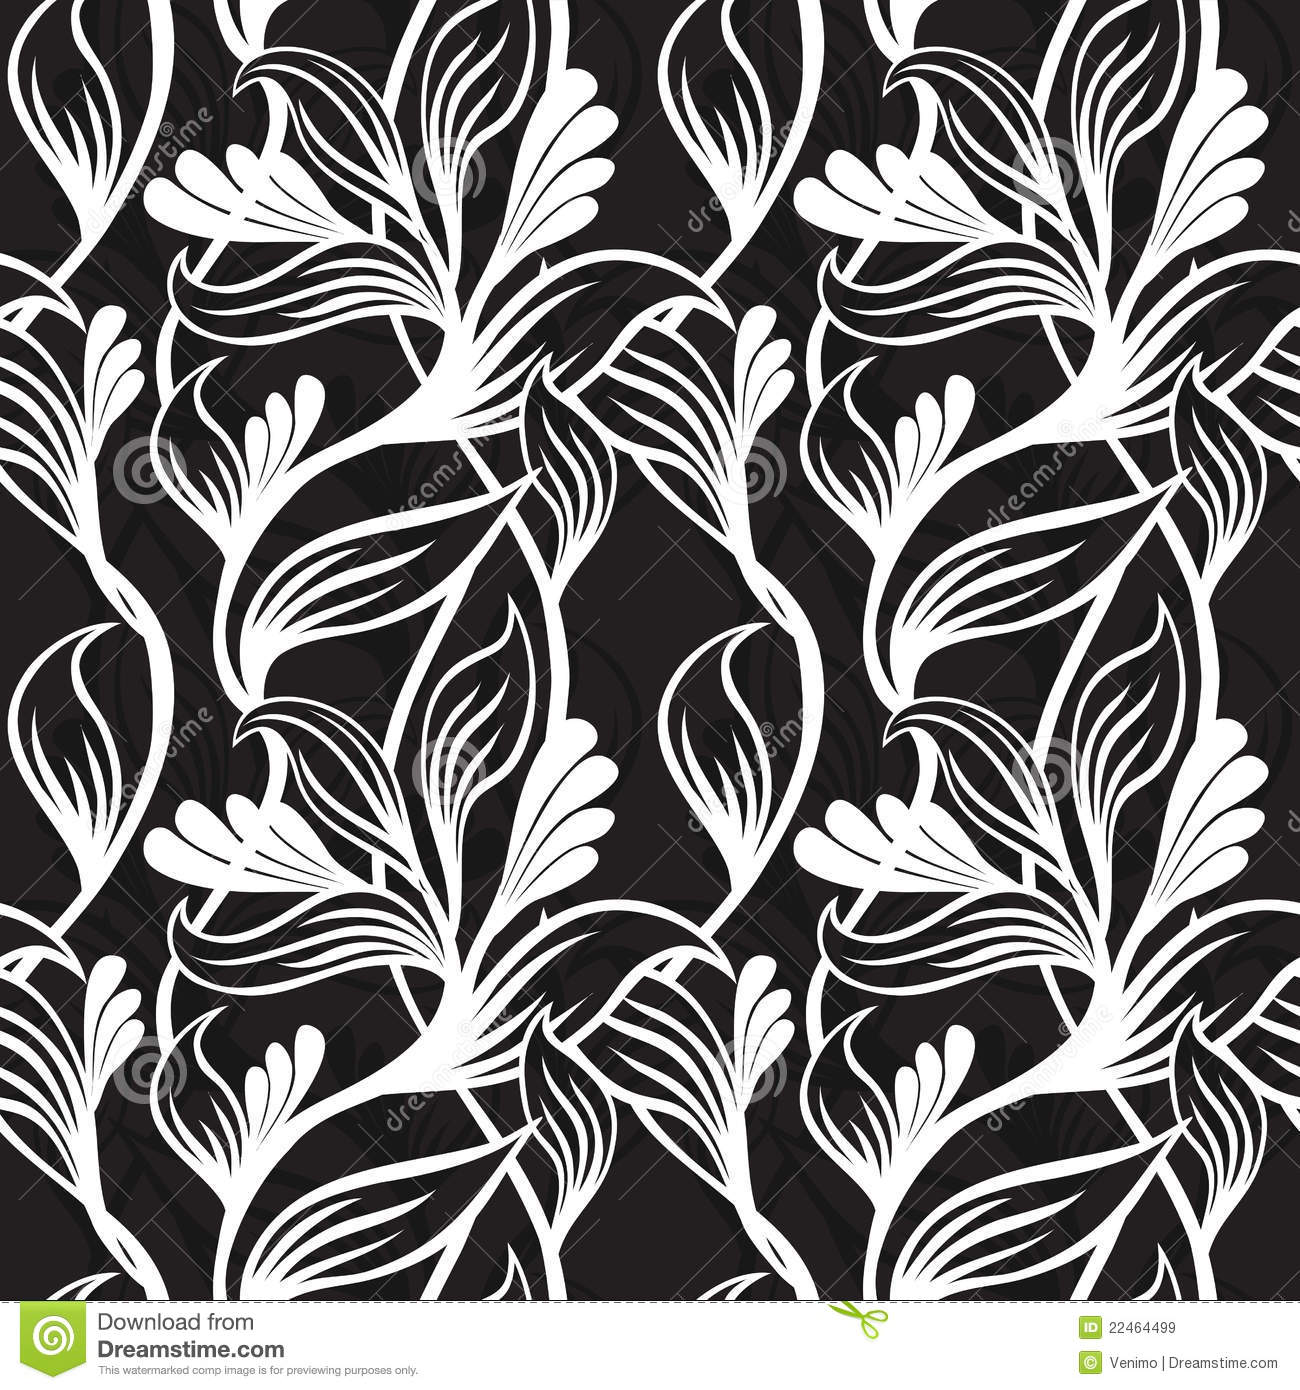 Free Black and White Floral